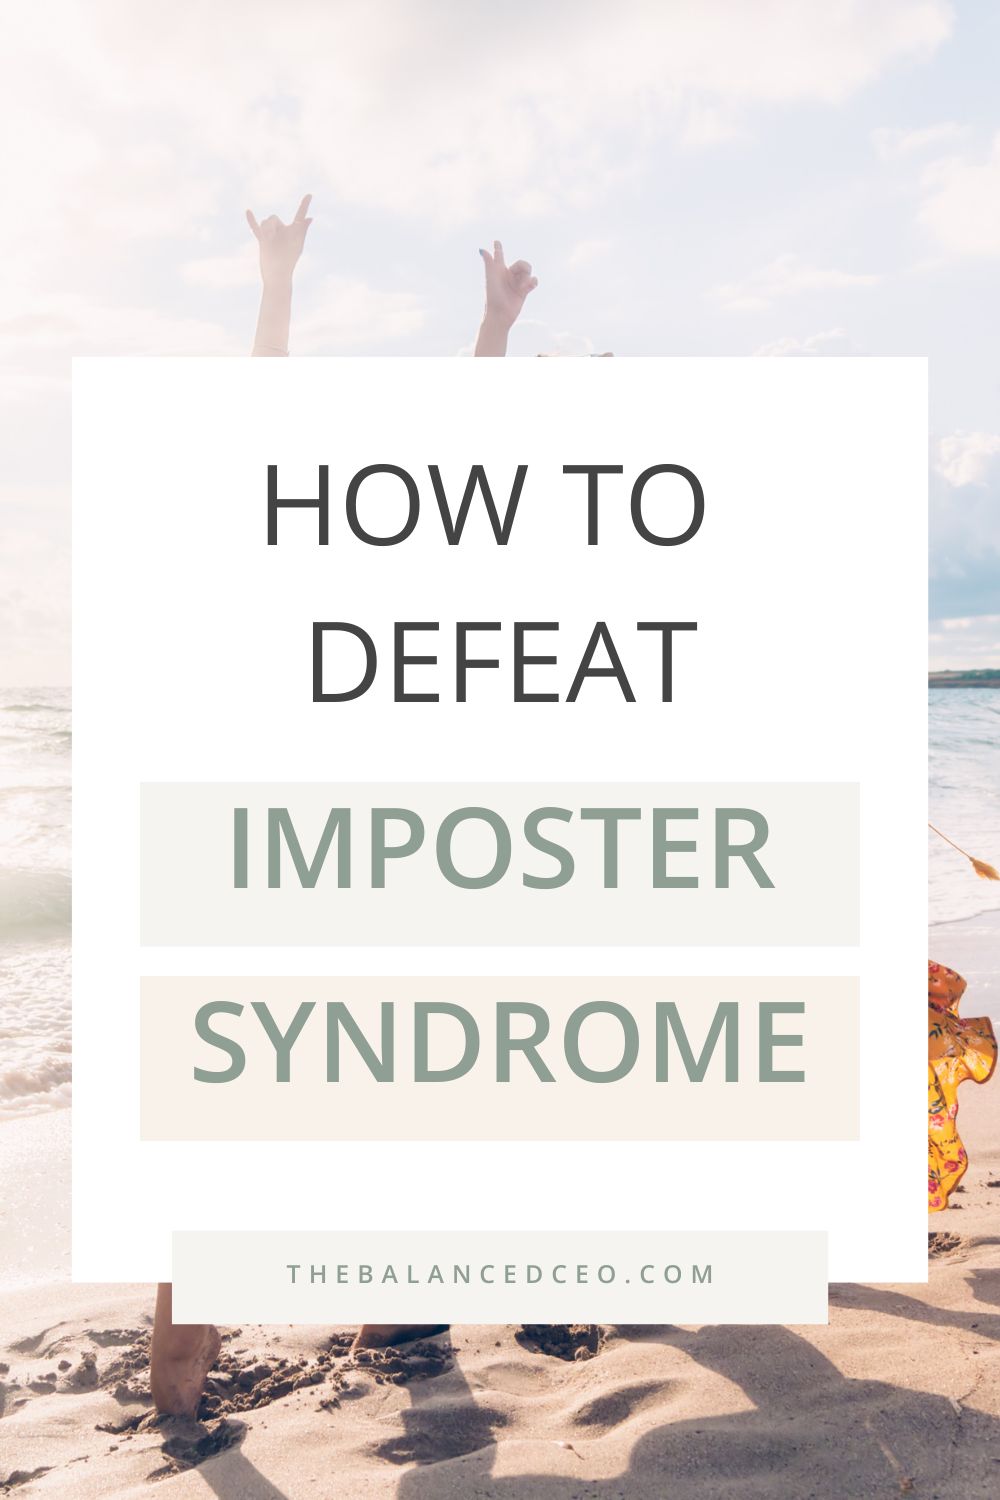 How to Defeat Imposter Syndrome